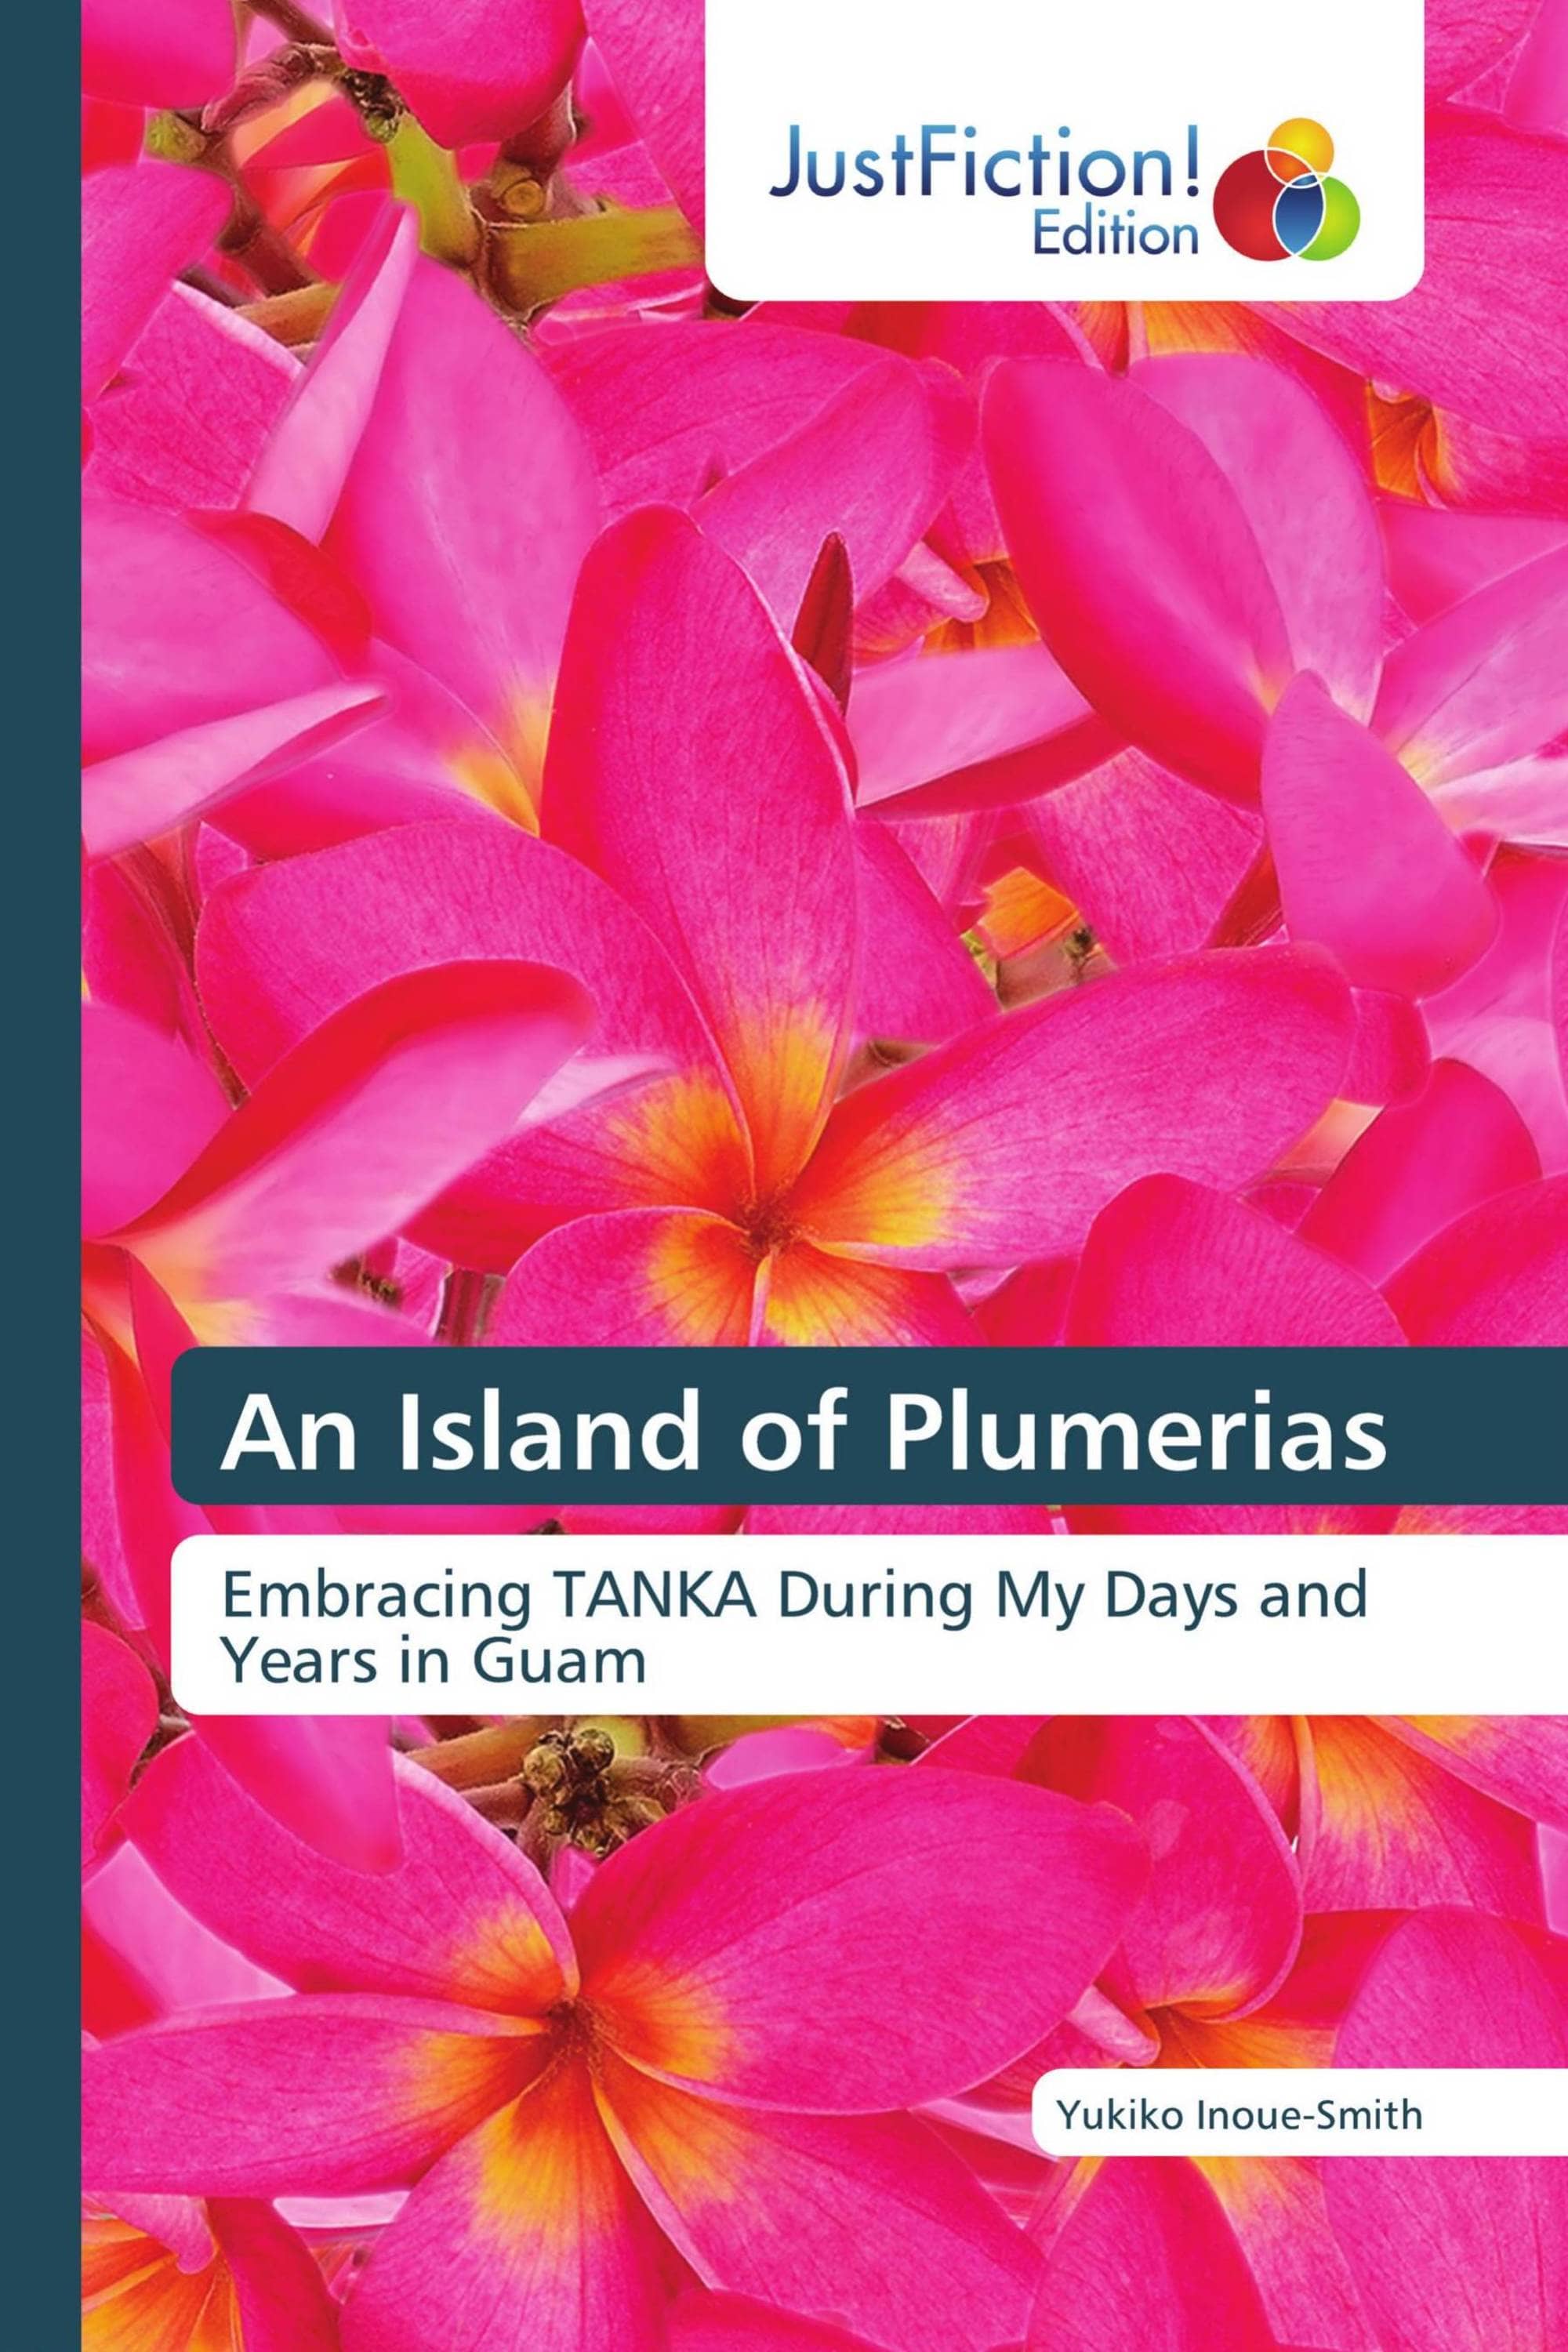 Photo of the "An Island of Plumerias" book cover